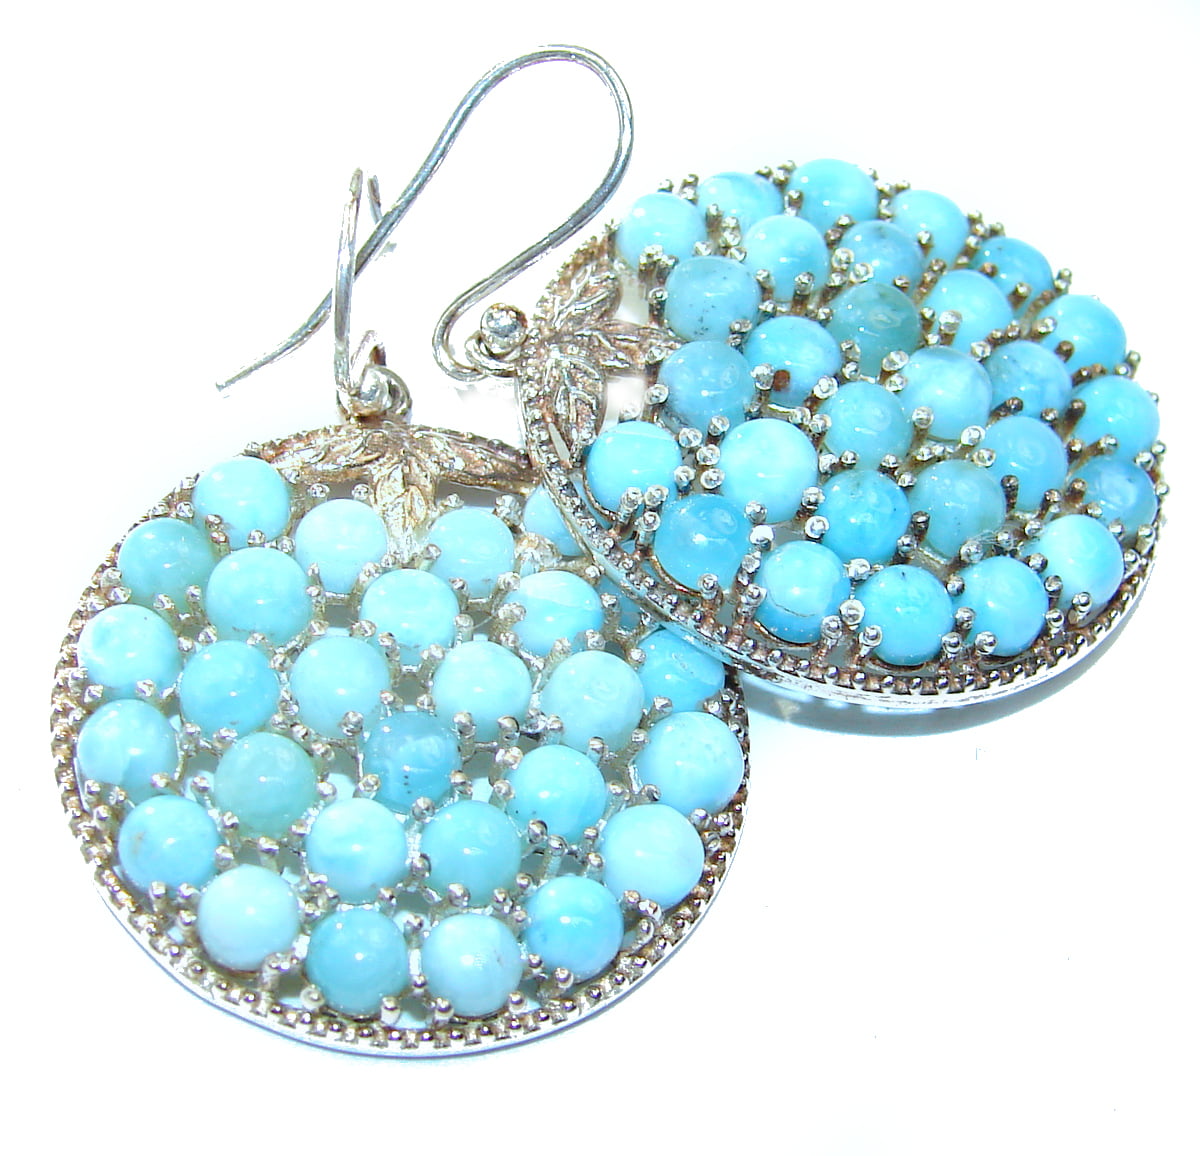 Outstanding Blue Turquoise Silver Plated 8 Grams Earring 1.75 Long Handmade Jewellry 